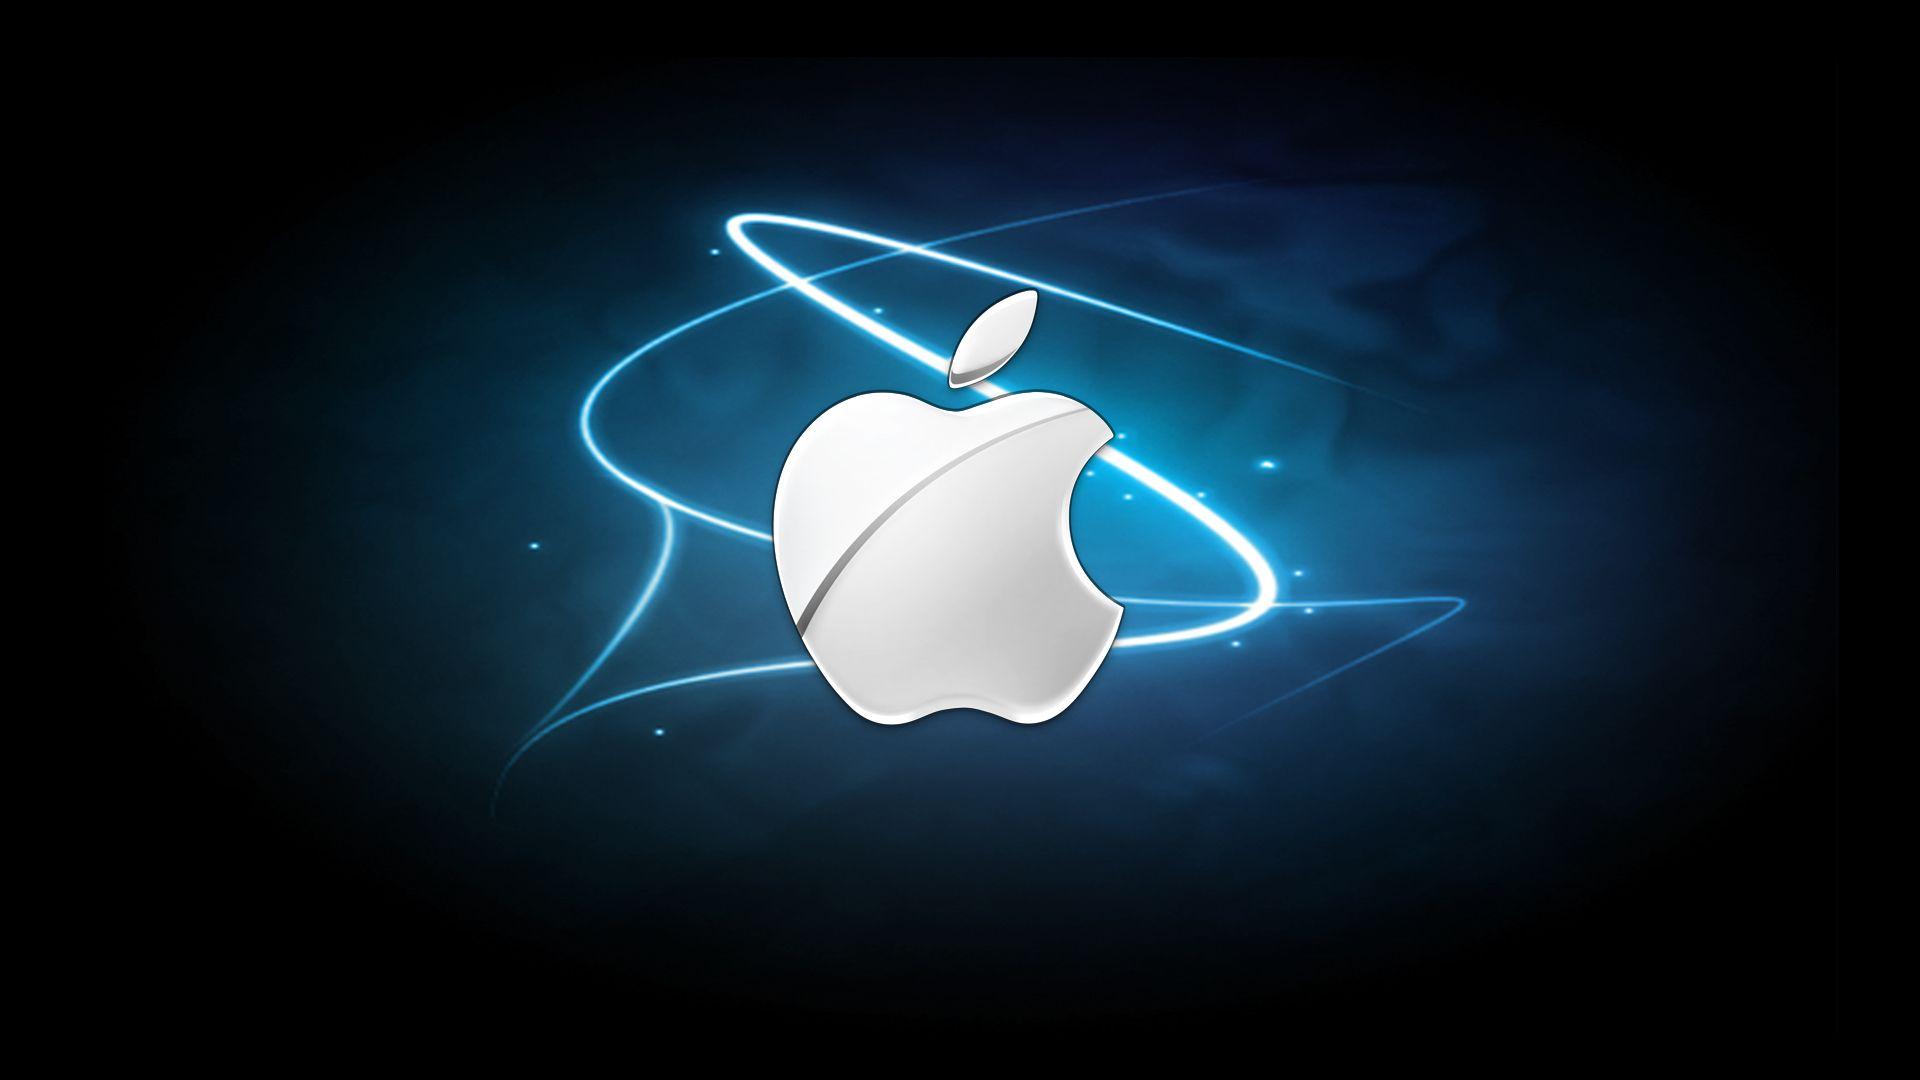 Official Apple Logo - Official Apple Logo HD Wallpaper, Background Images